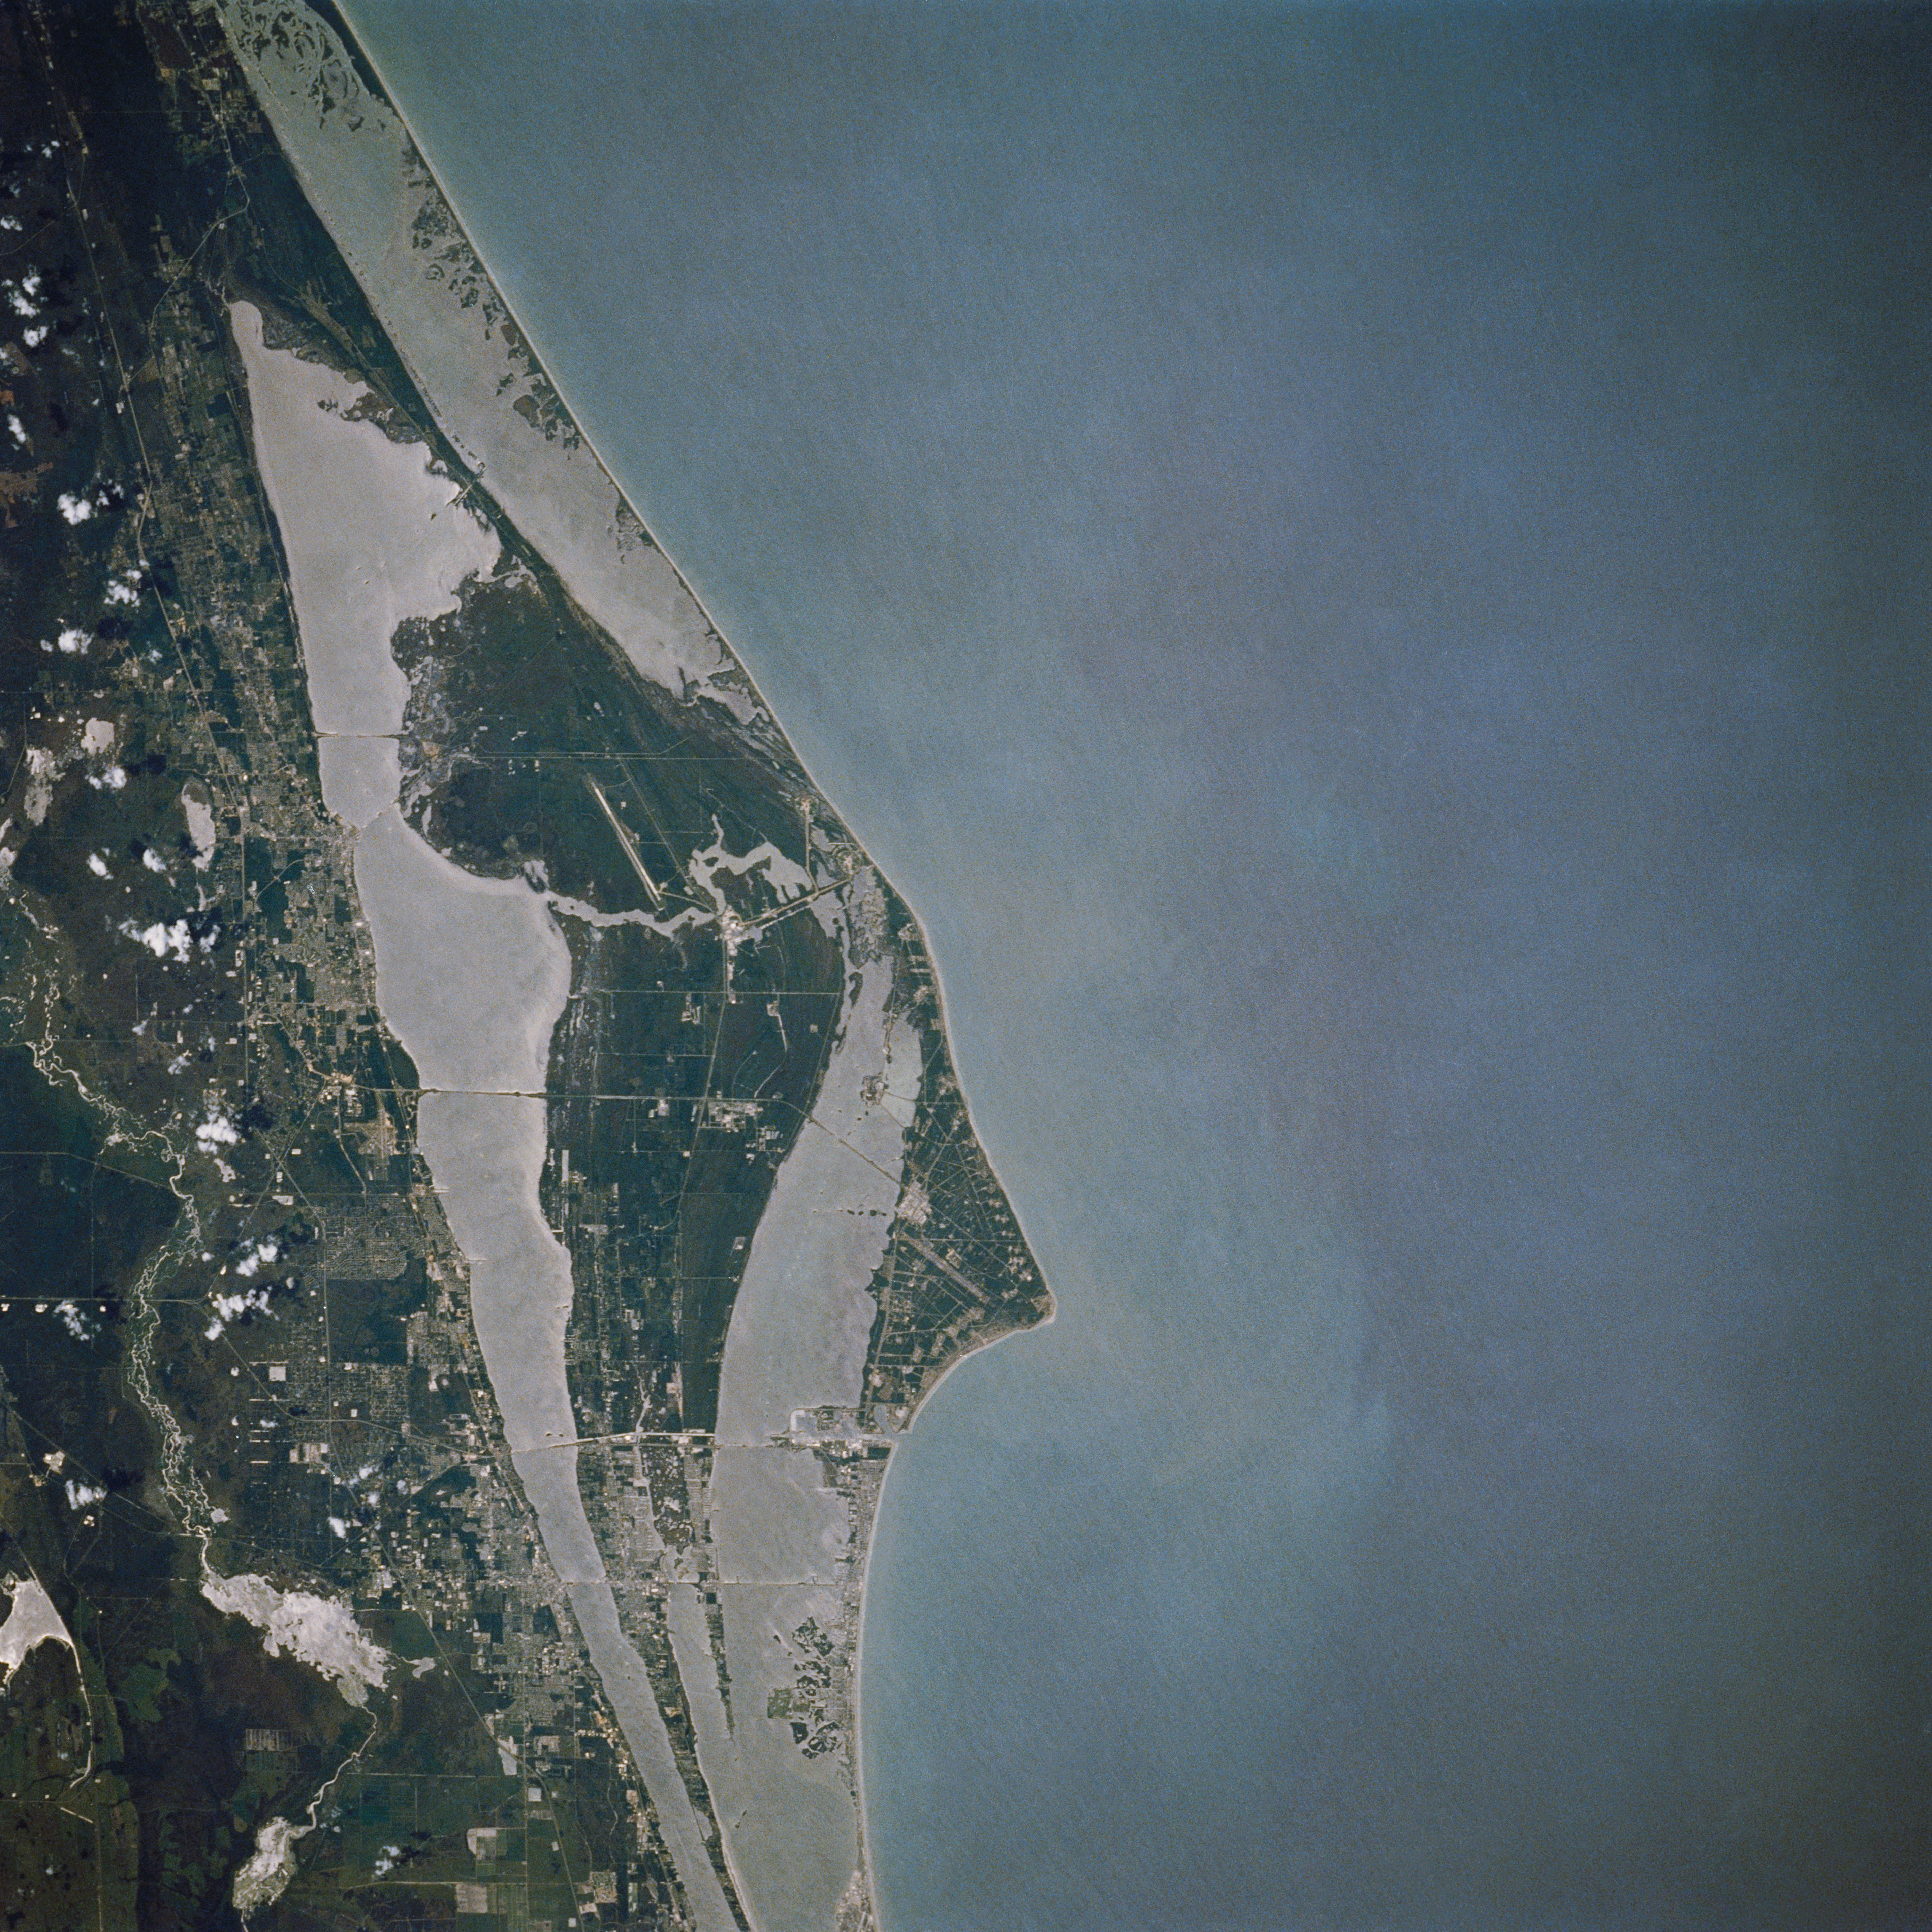 STS-30 crew Earth observation photograph of the Cape Canaveral area in Florida including NASA's Kennedy Space Center